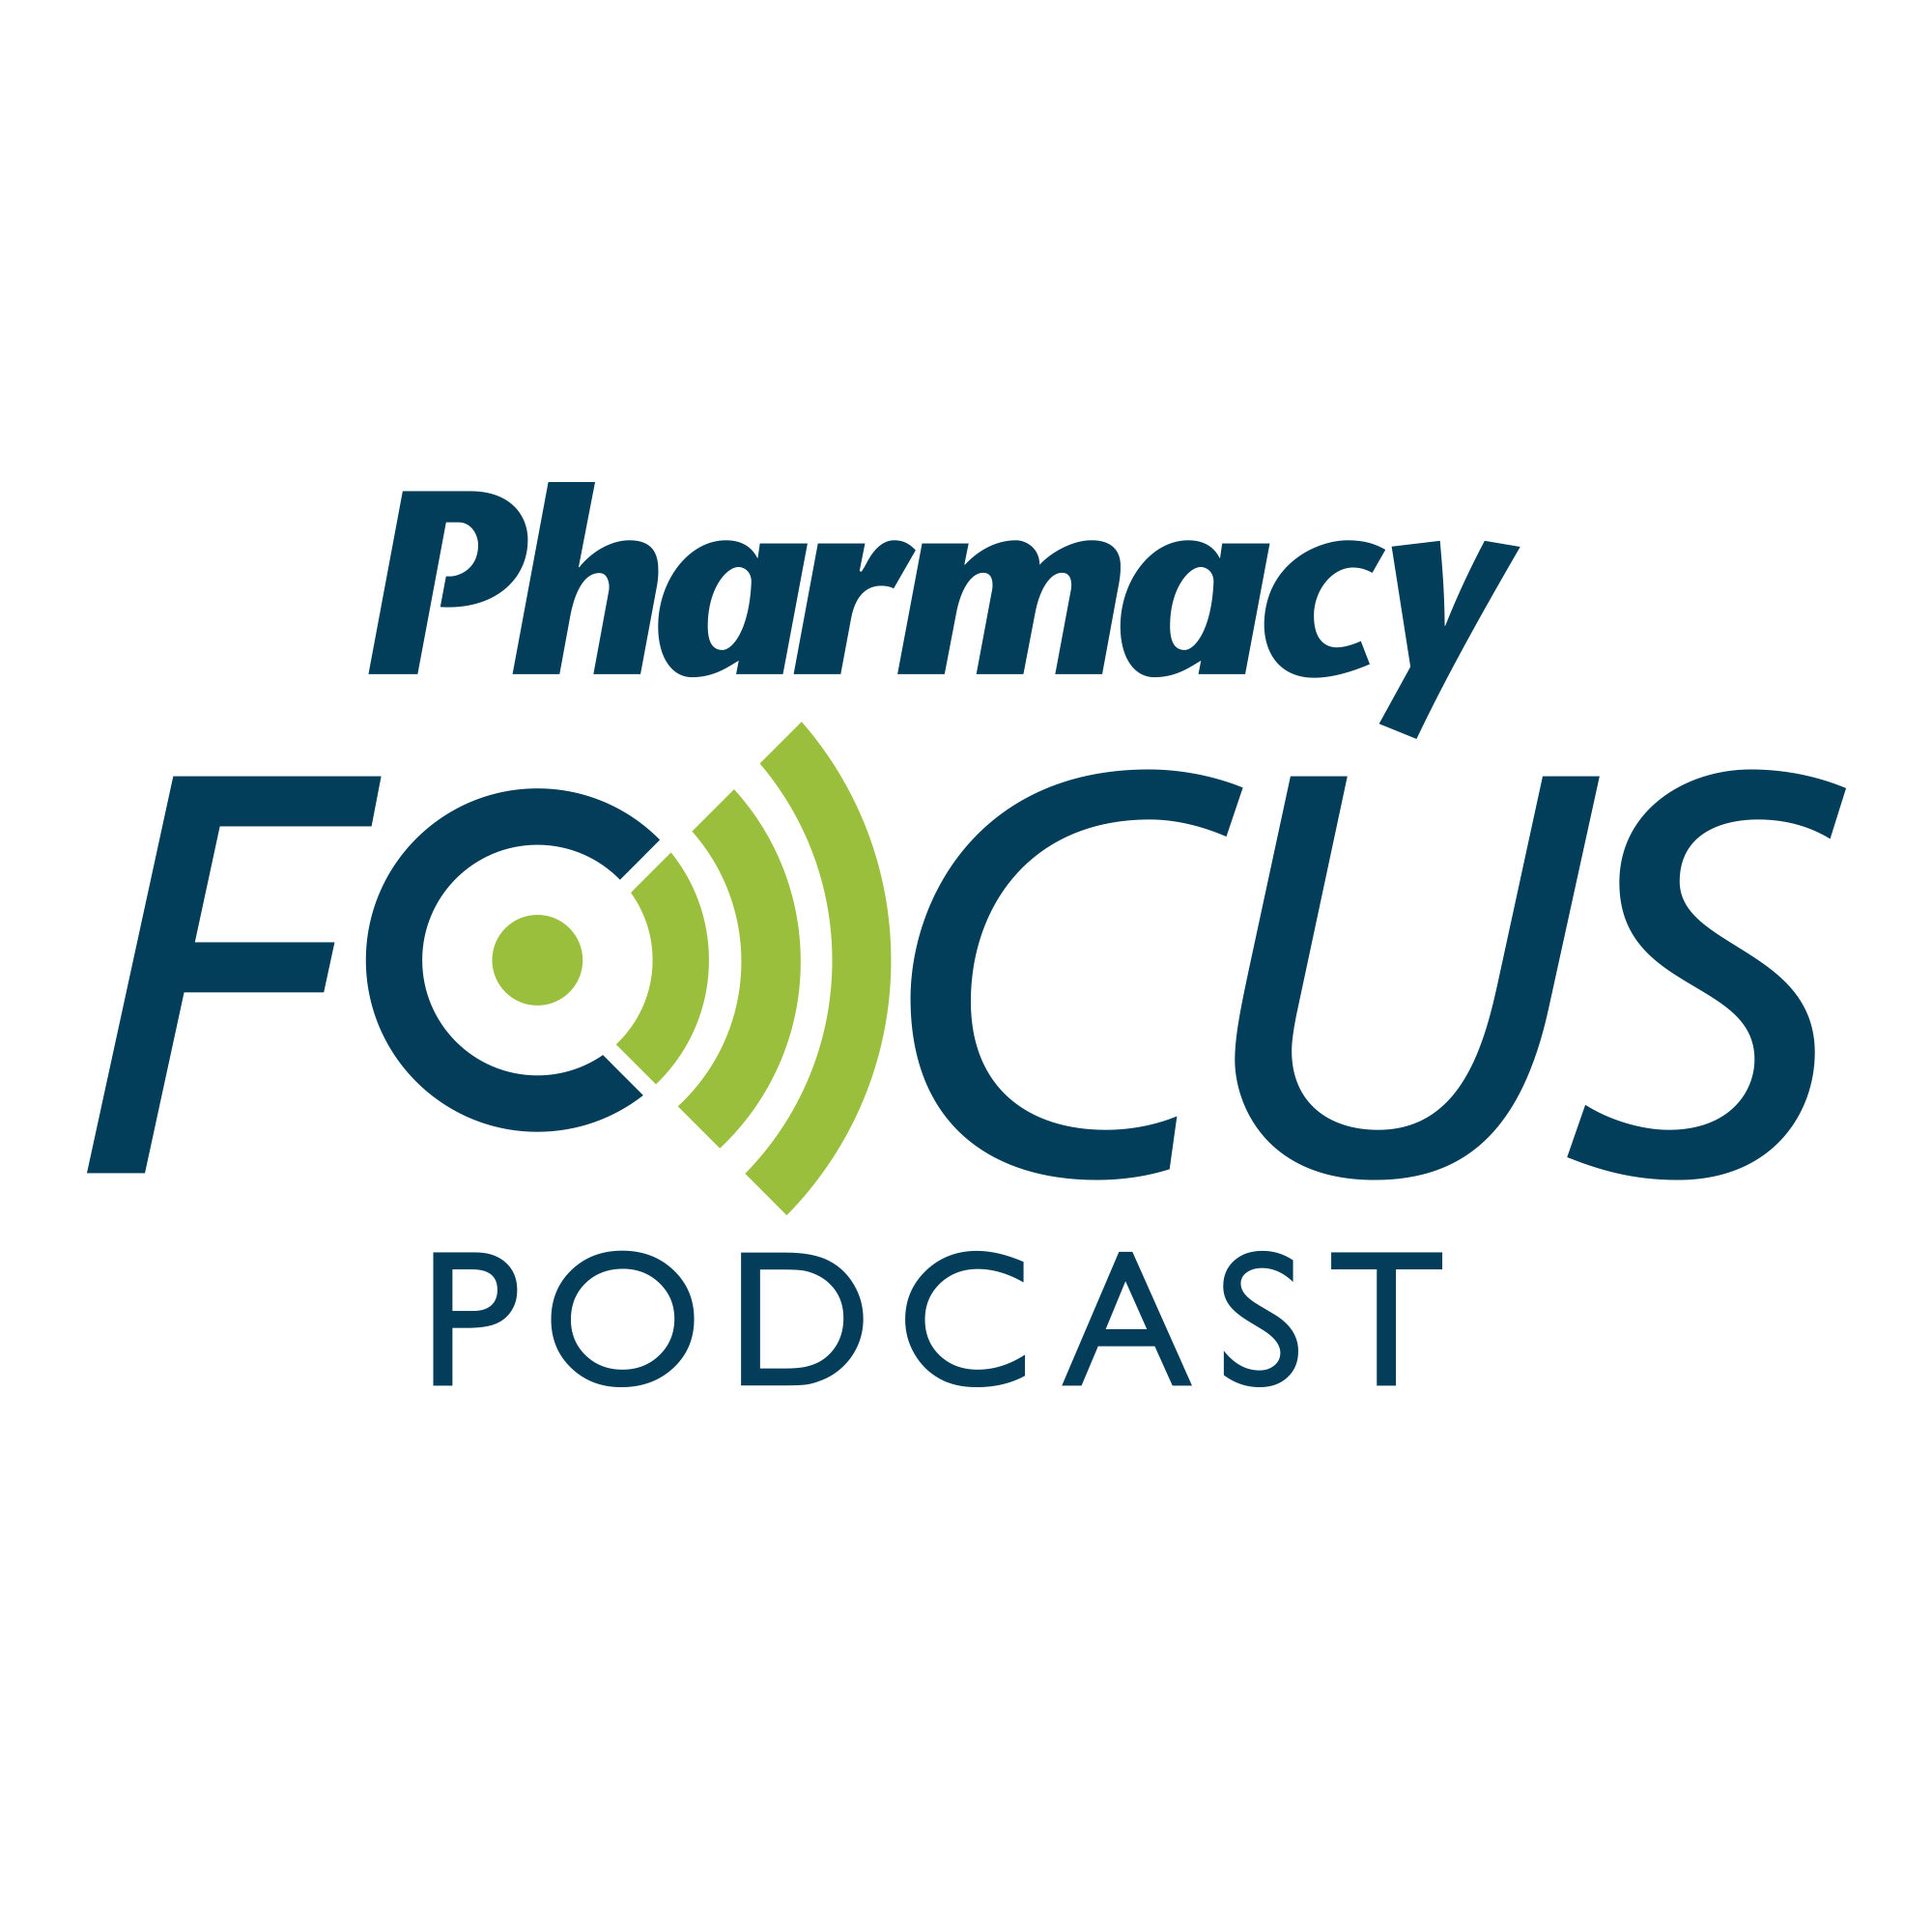 Pharmacy Focus Episode 21: The Patient Journey in Specialty Pharmacy